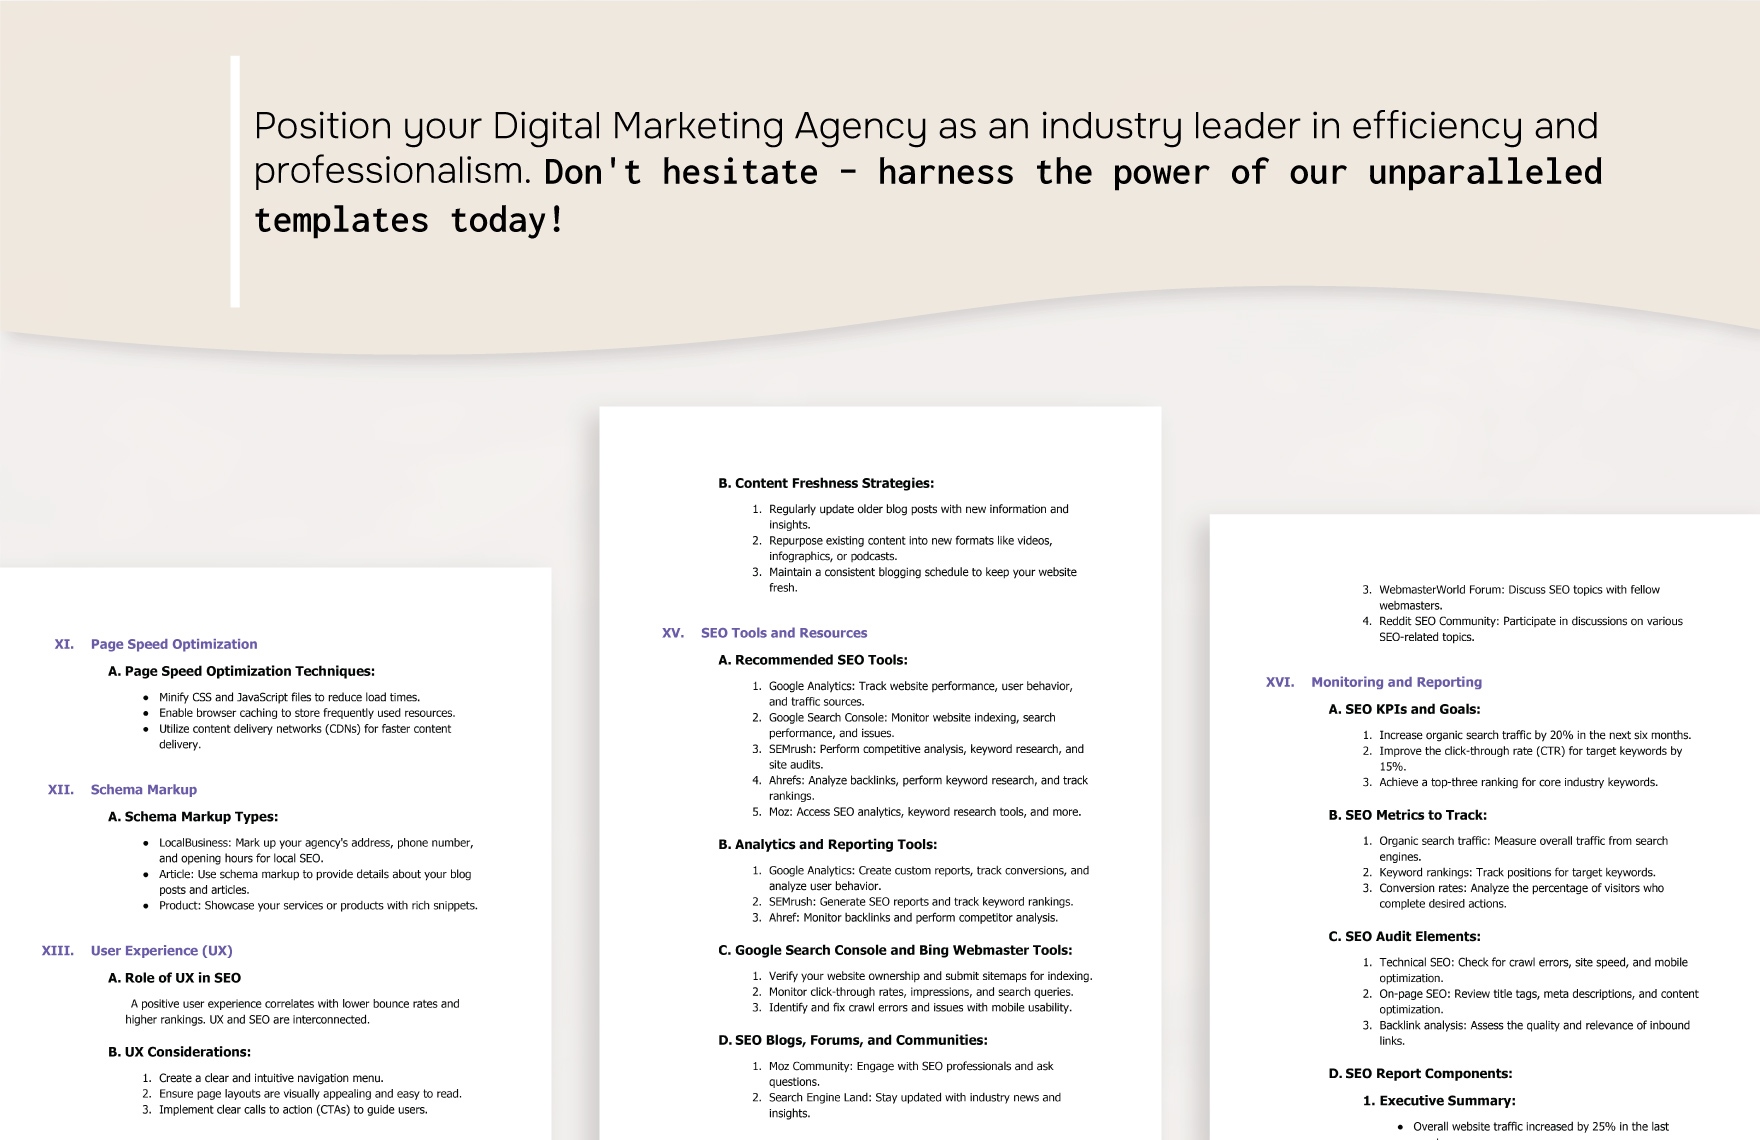 Digital Marketing Agency On-Page SEO Guide Template